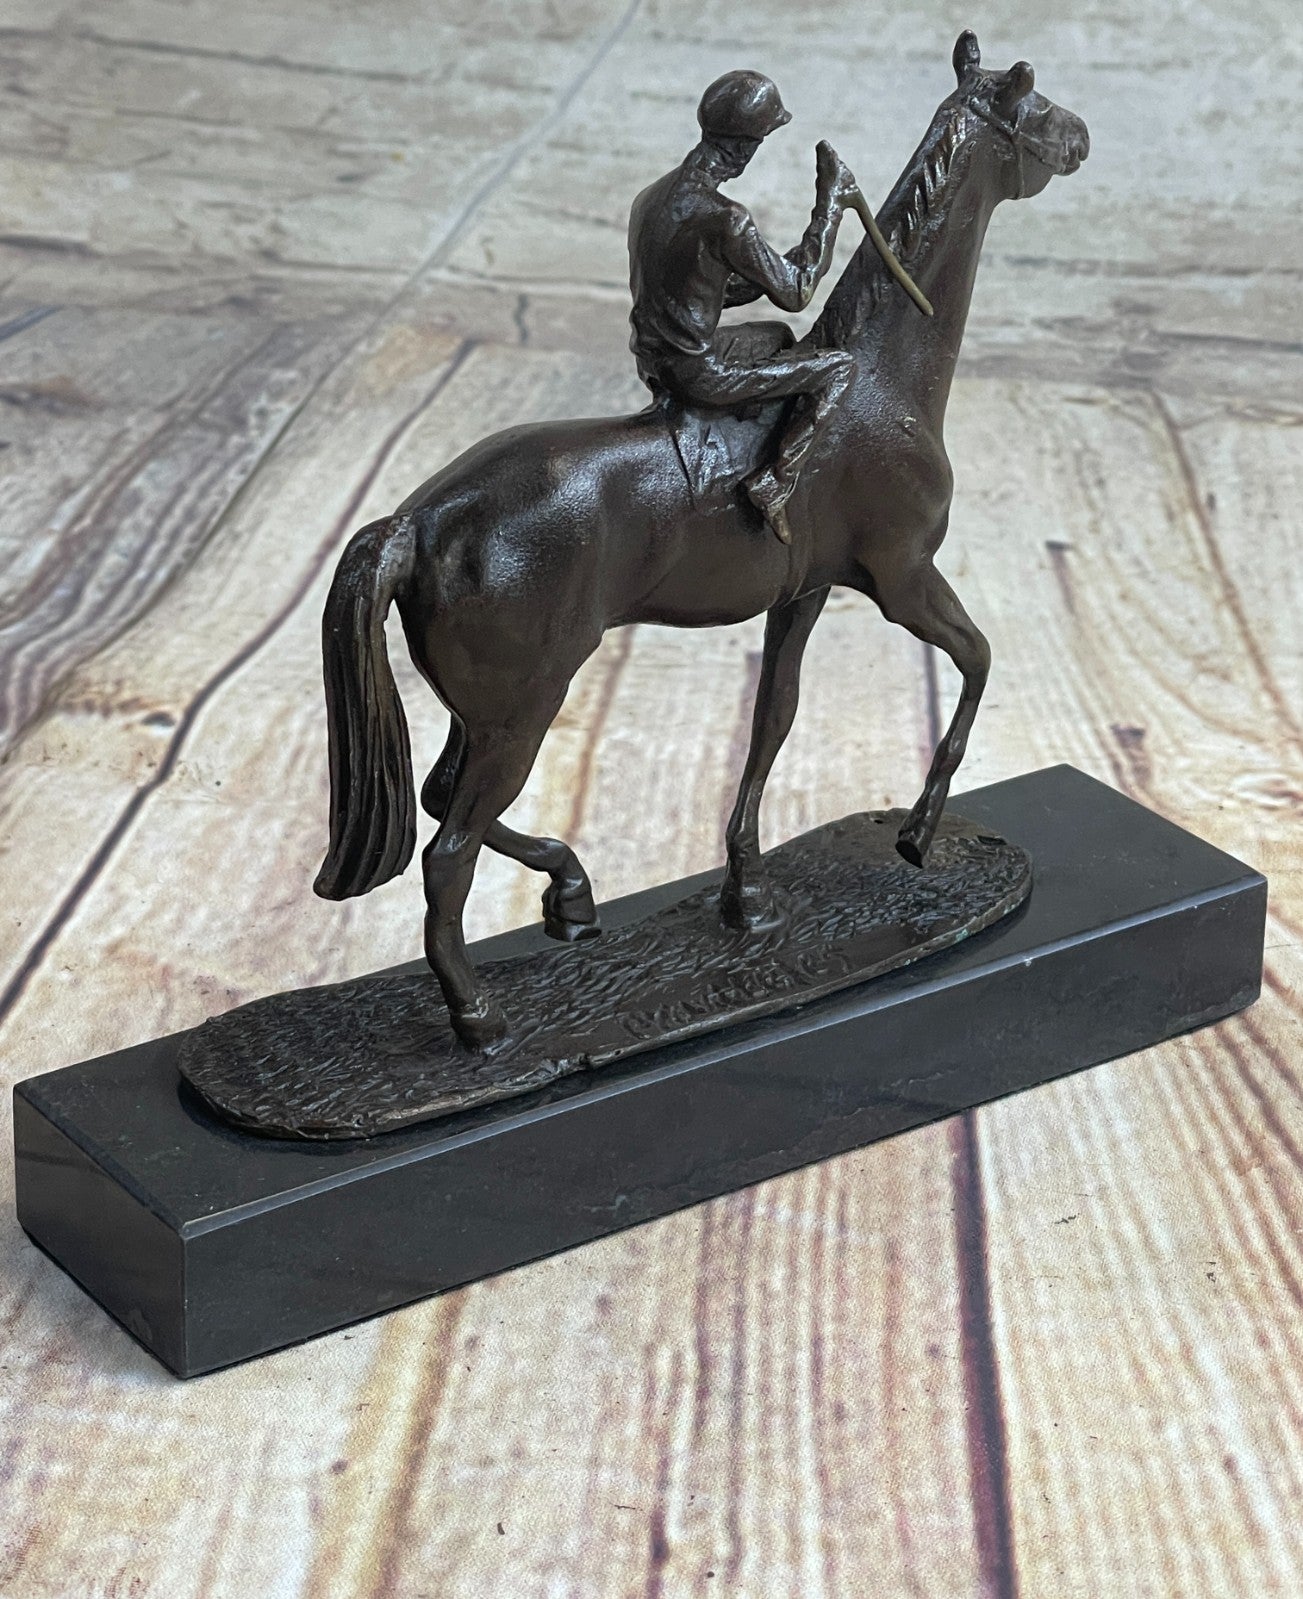 Handcrafted bronze sculpture SALE Anime Marble Horse With Jockey Original Signed